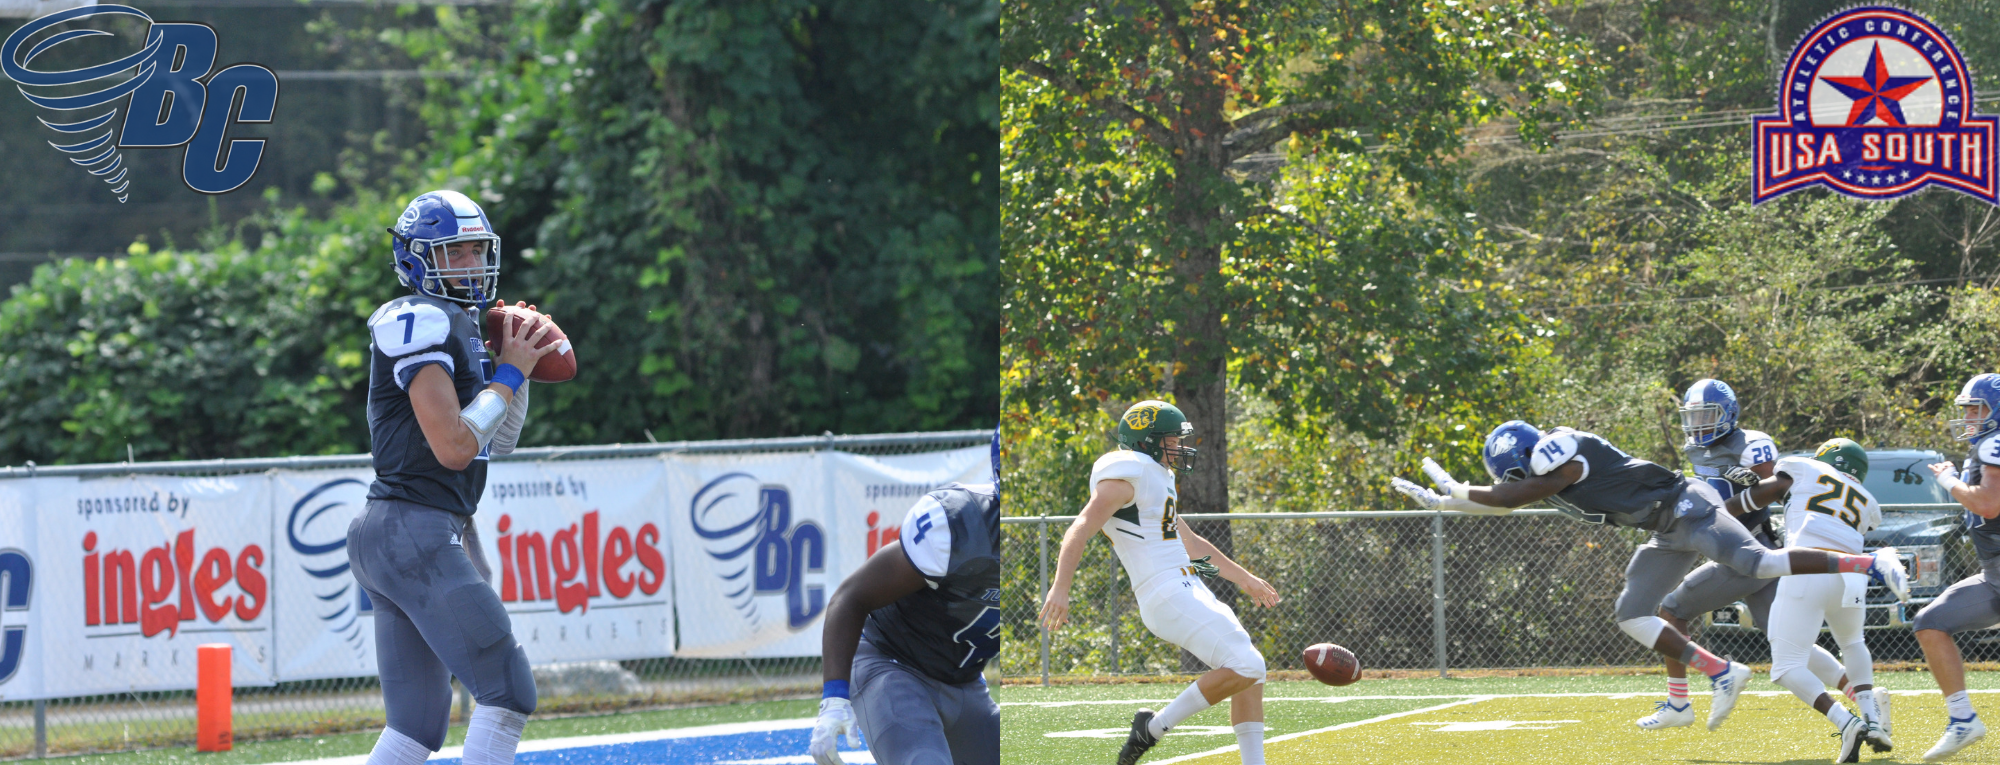 Dalton Cole and Trevon Charles Earn USA South Player of the Week Honors